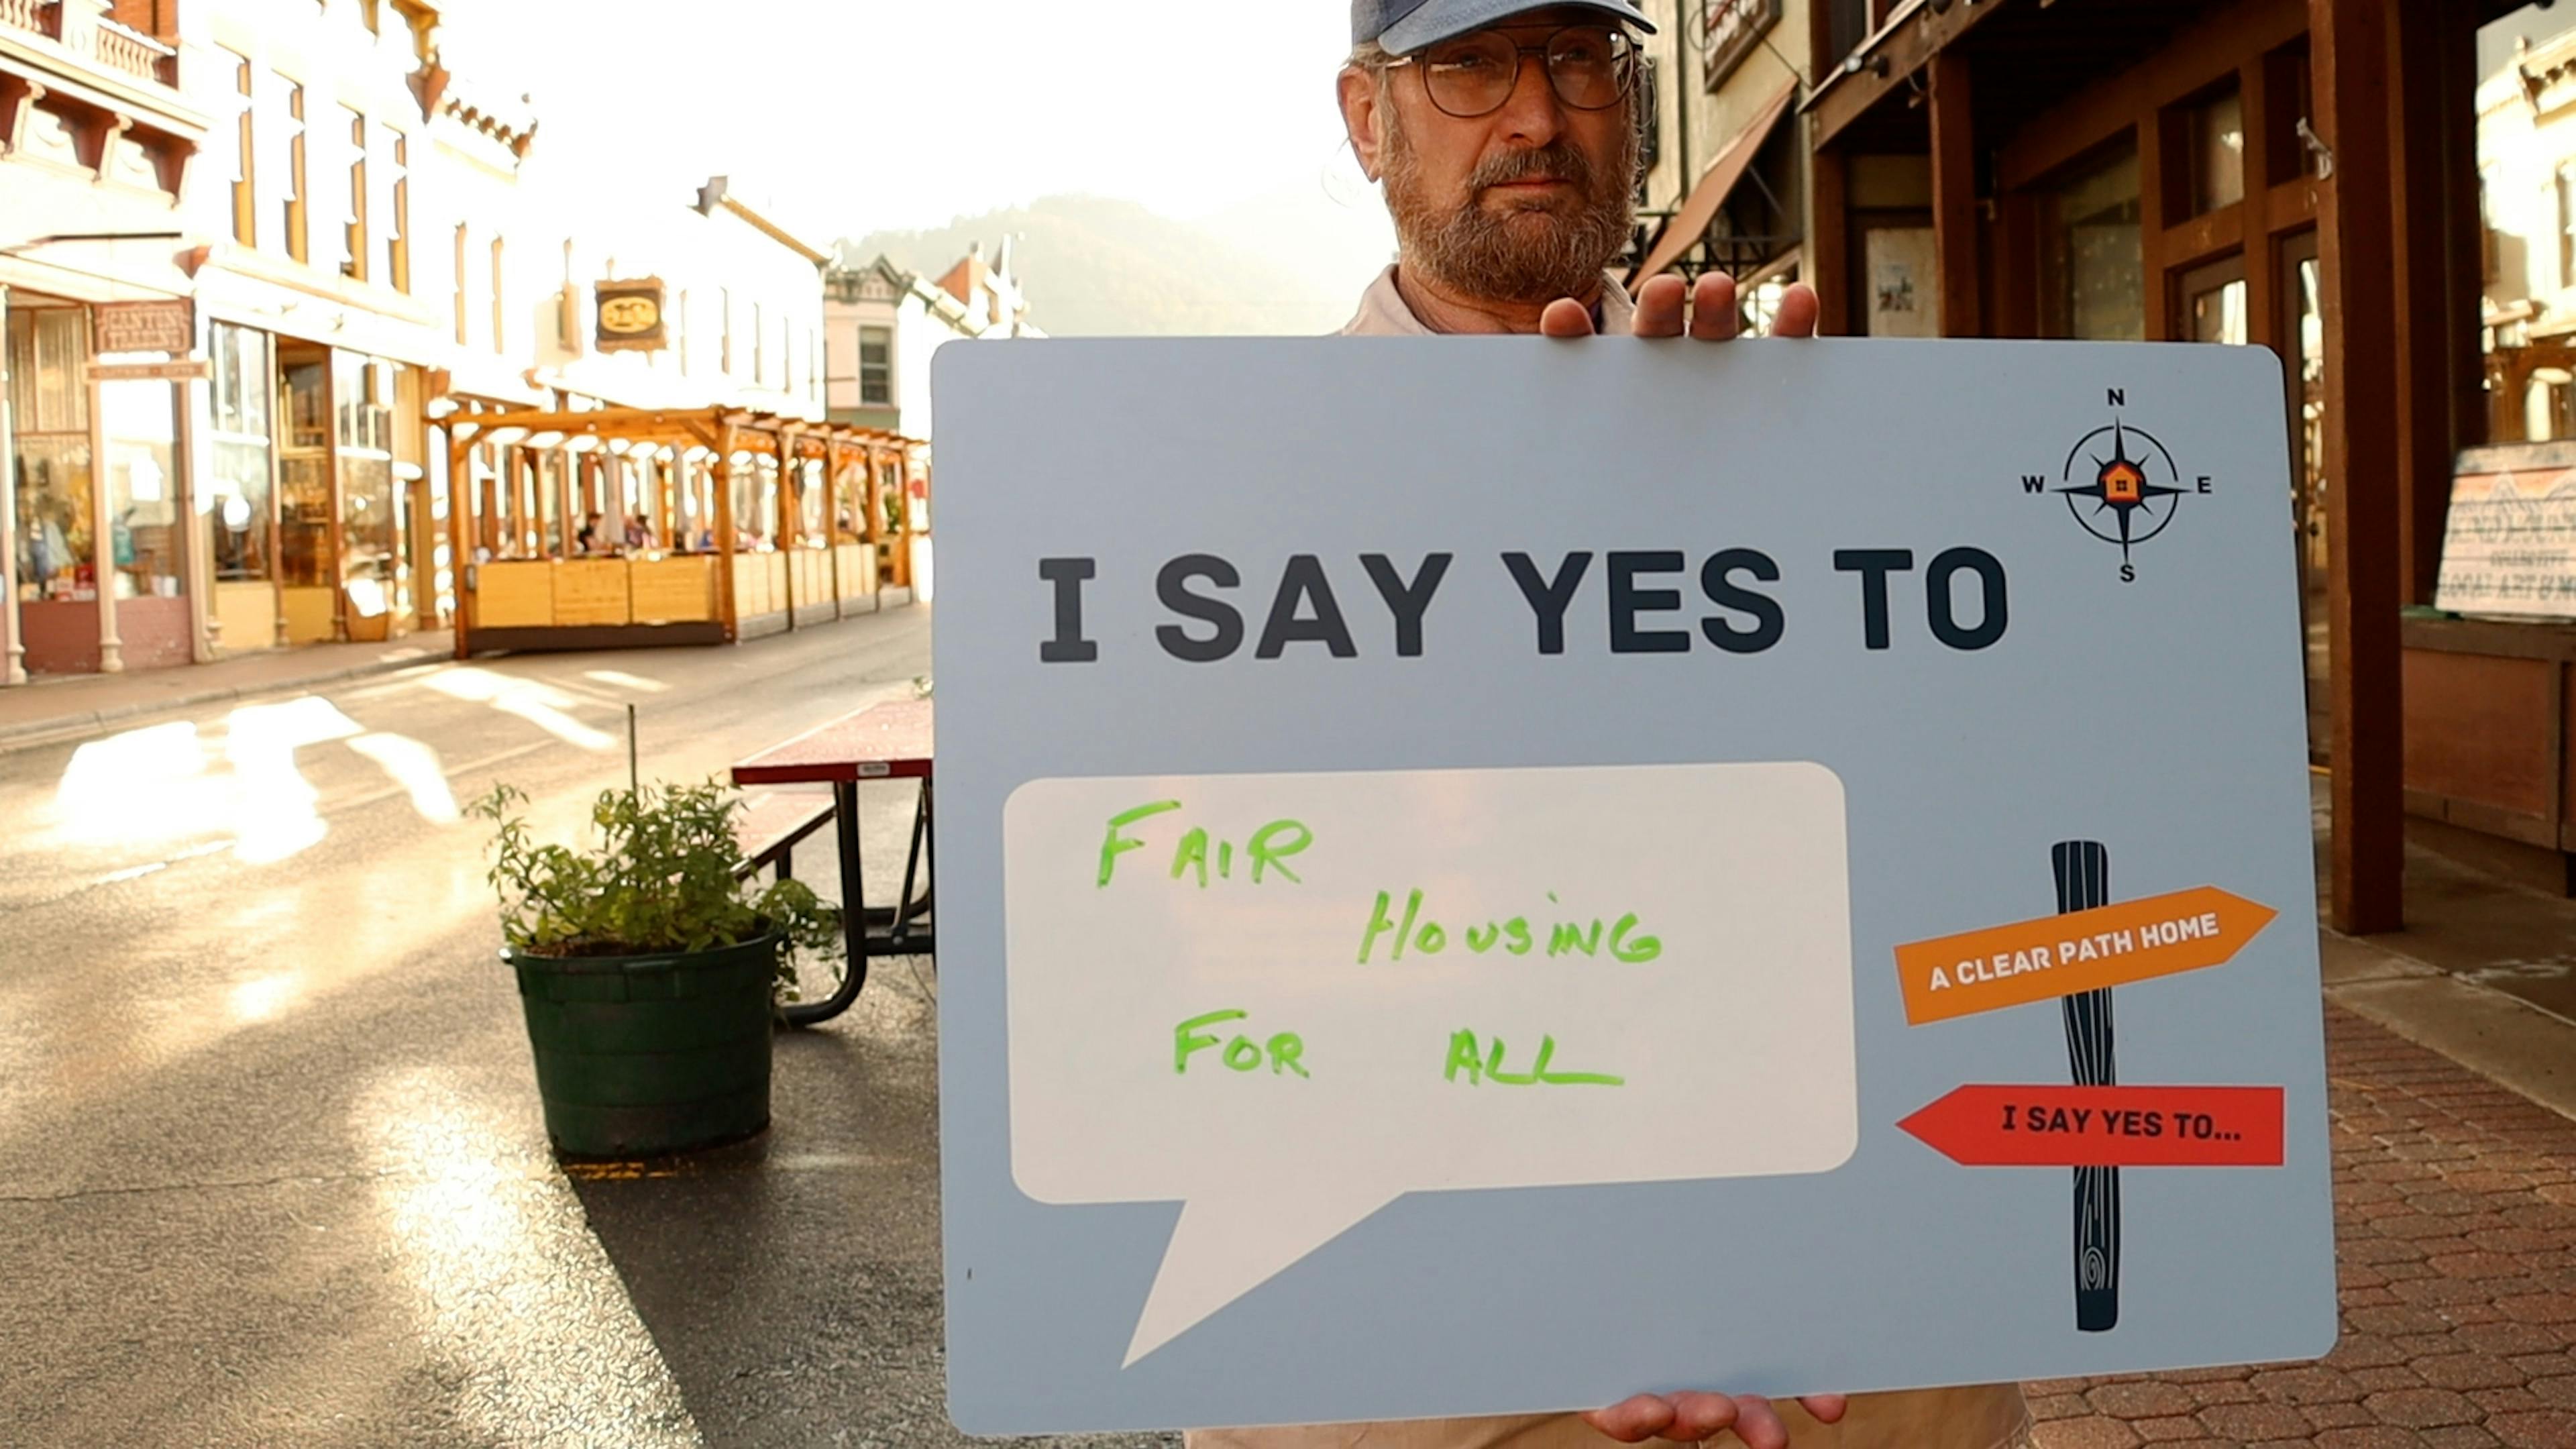 I Say Yes To... Fair Housing for All